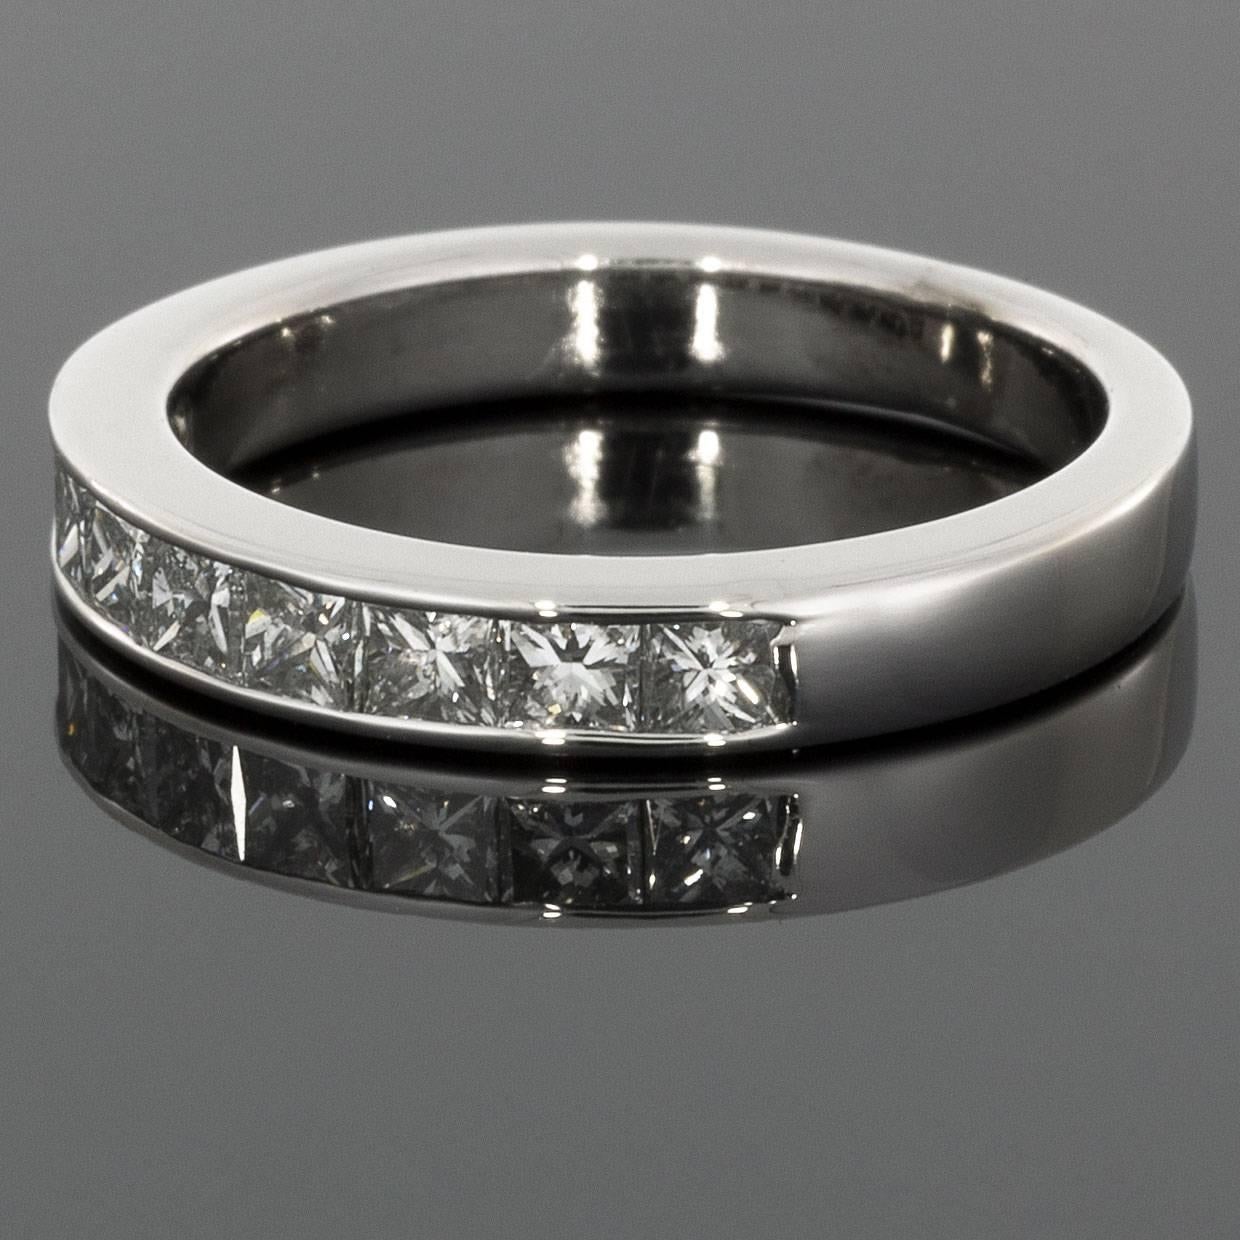 This classic band is a beautiful 14 karat white gold princess diamond channel band that can dress up any ring. It can be used as a wedding band, stand alone band, or stack ring. The ring has 9 princess cut diamonds that have a combined total weight